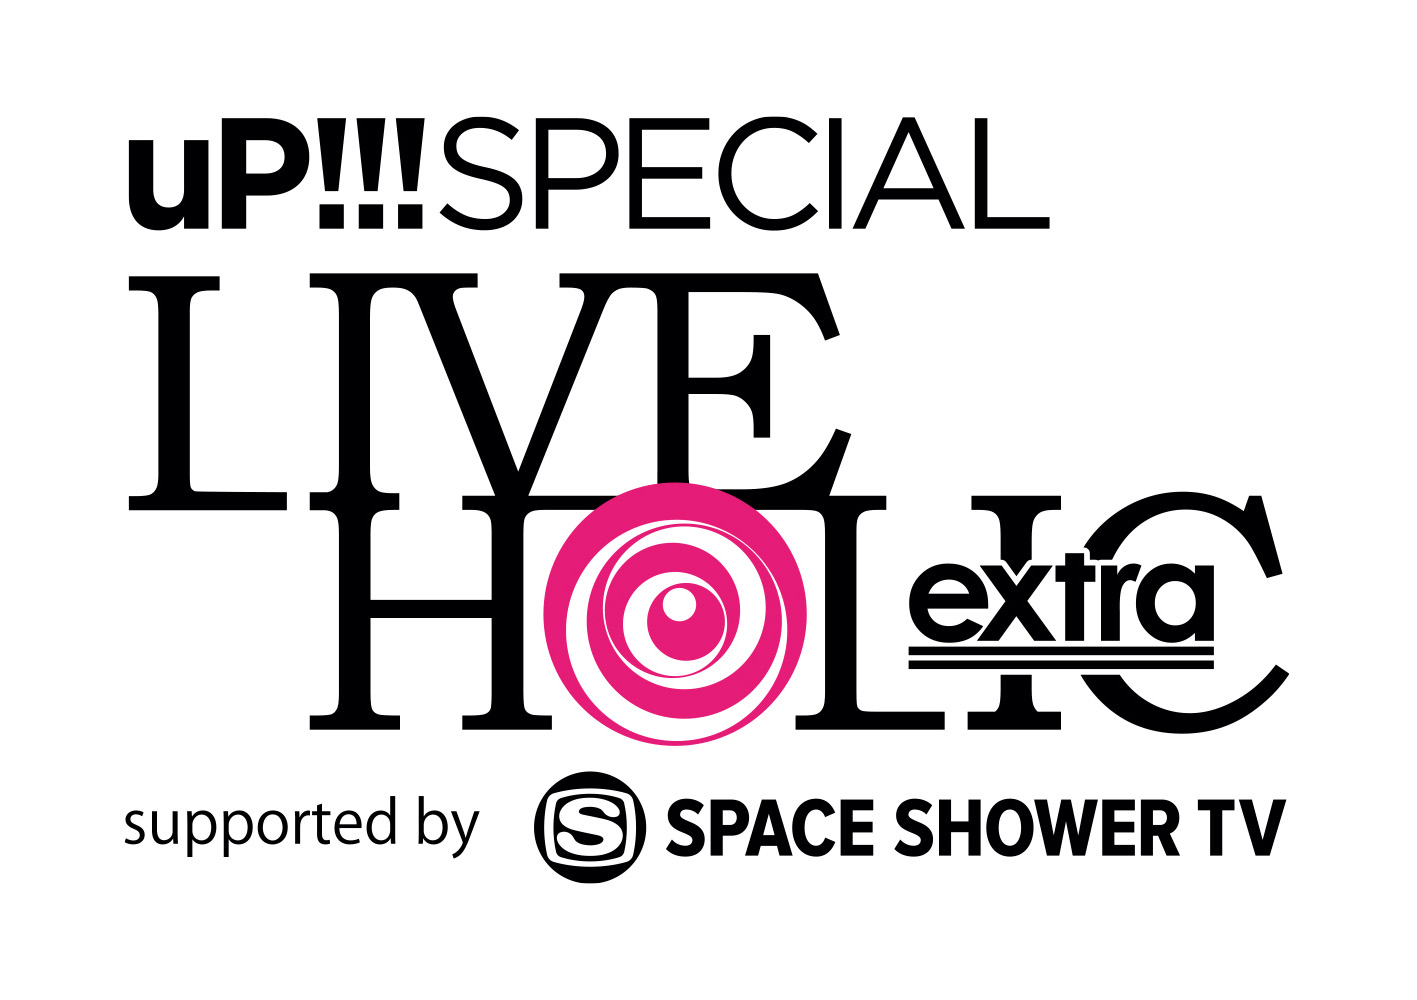 "uP!!! SPECIAL LIVE HOLIC extra vol.3" 出演決定！